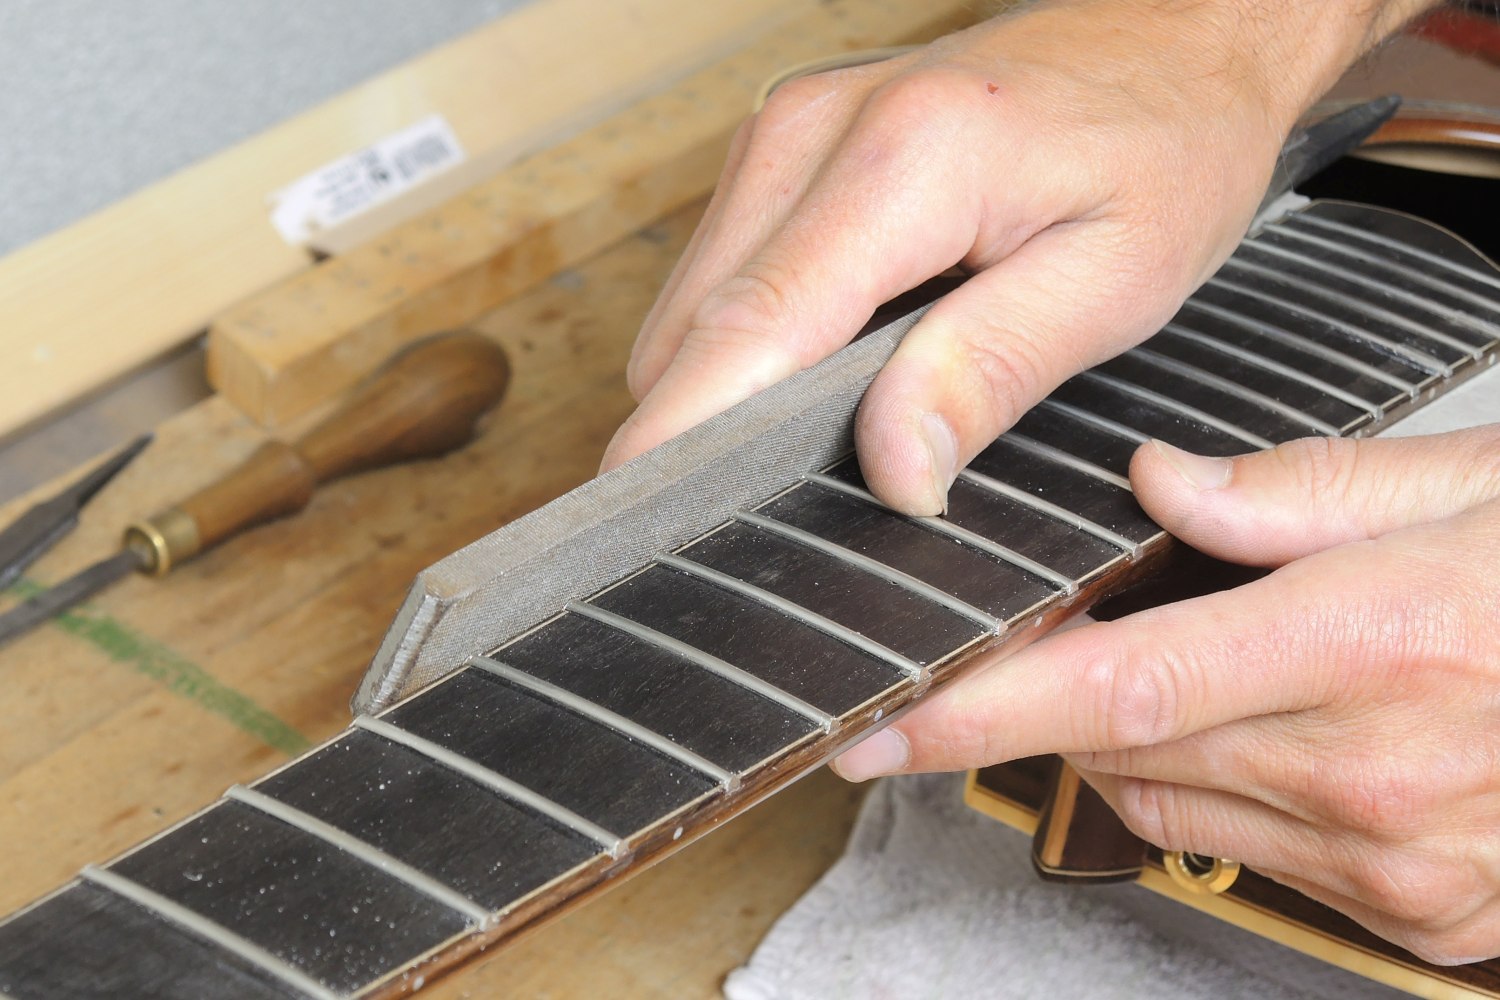 Re-fretting of an acoustic guitar - The frets are filed level with the fingerboard